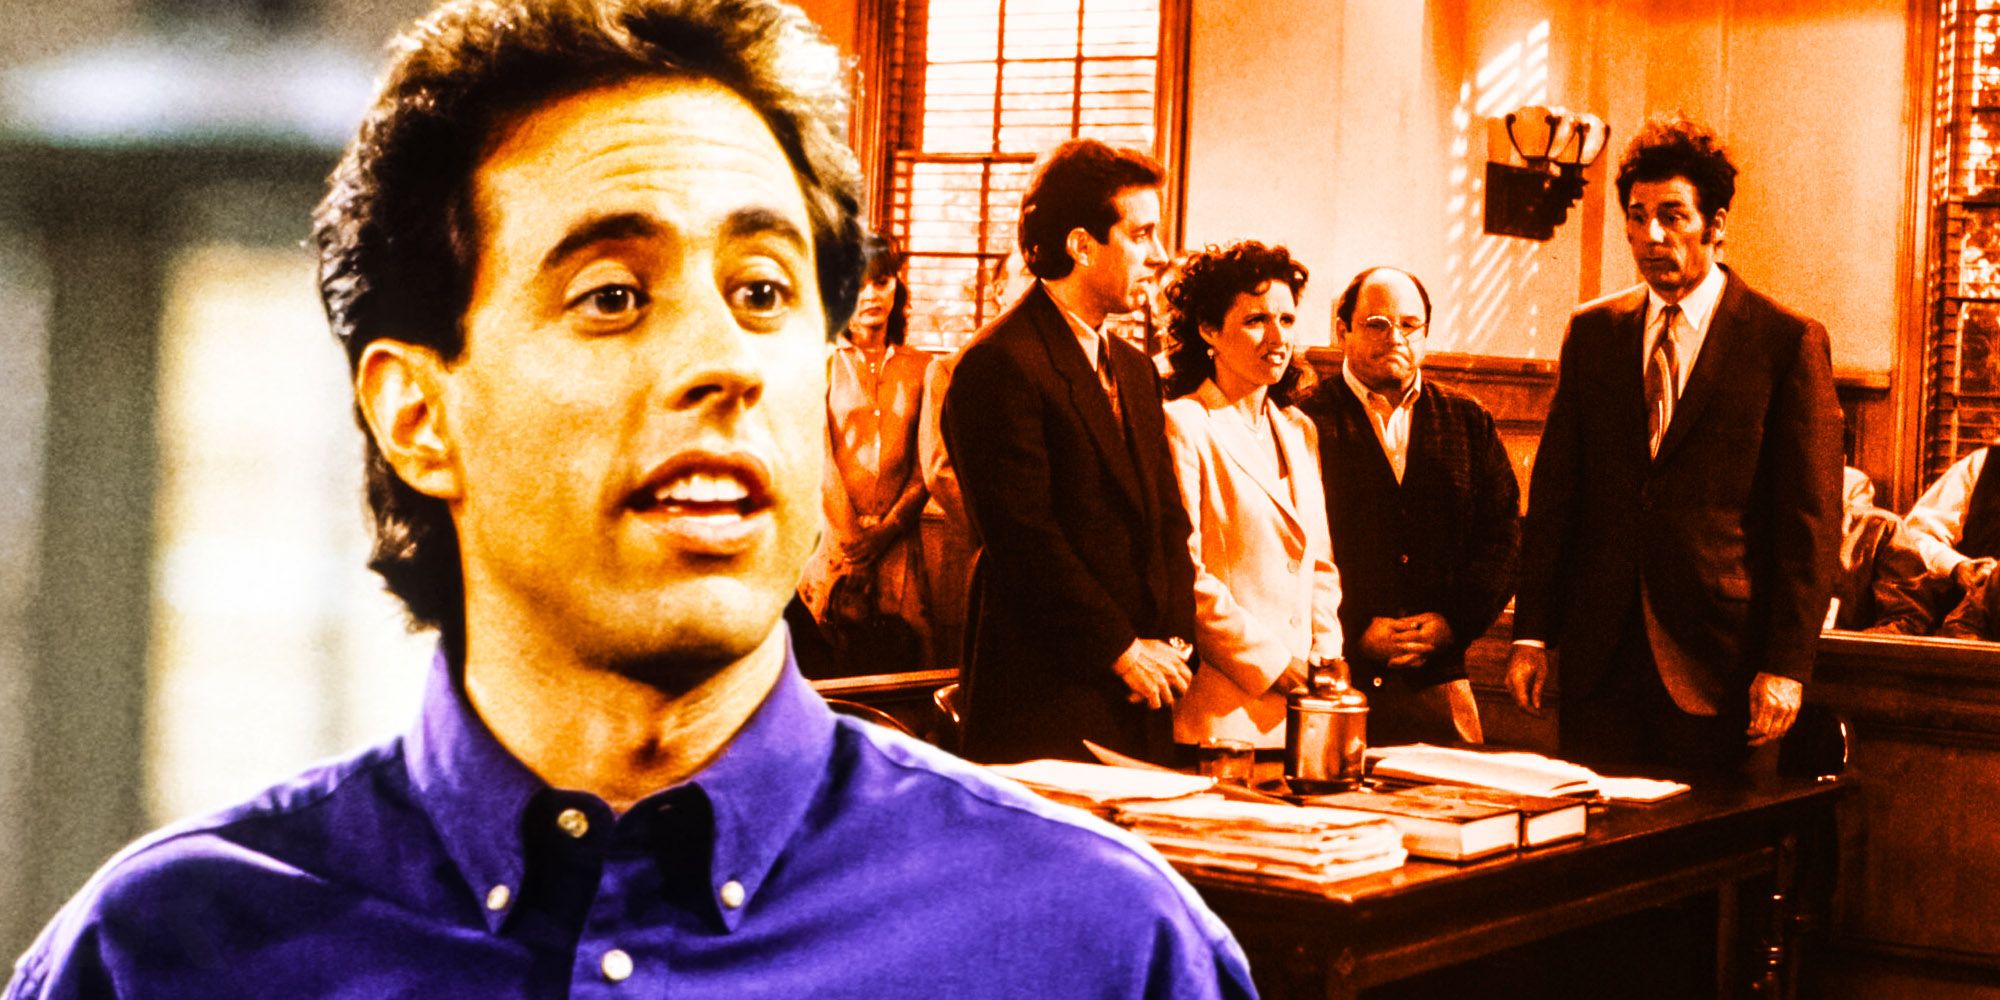 Larry David Confirms Huge Seinfeld Ending Theories In Curb Your Enthusiasm’s Series Finale (With A Twist)